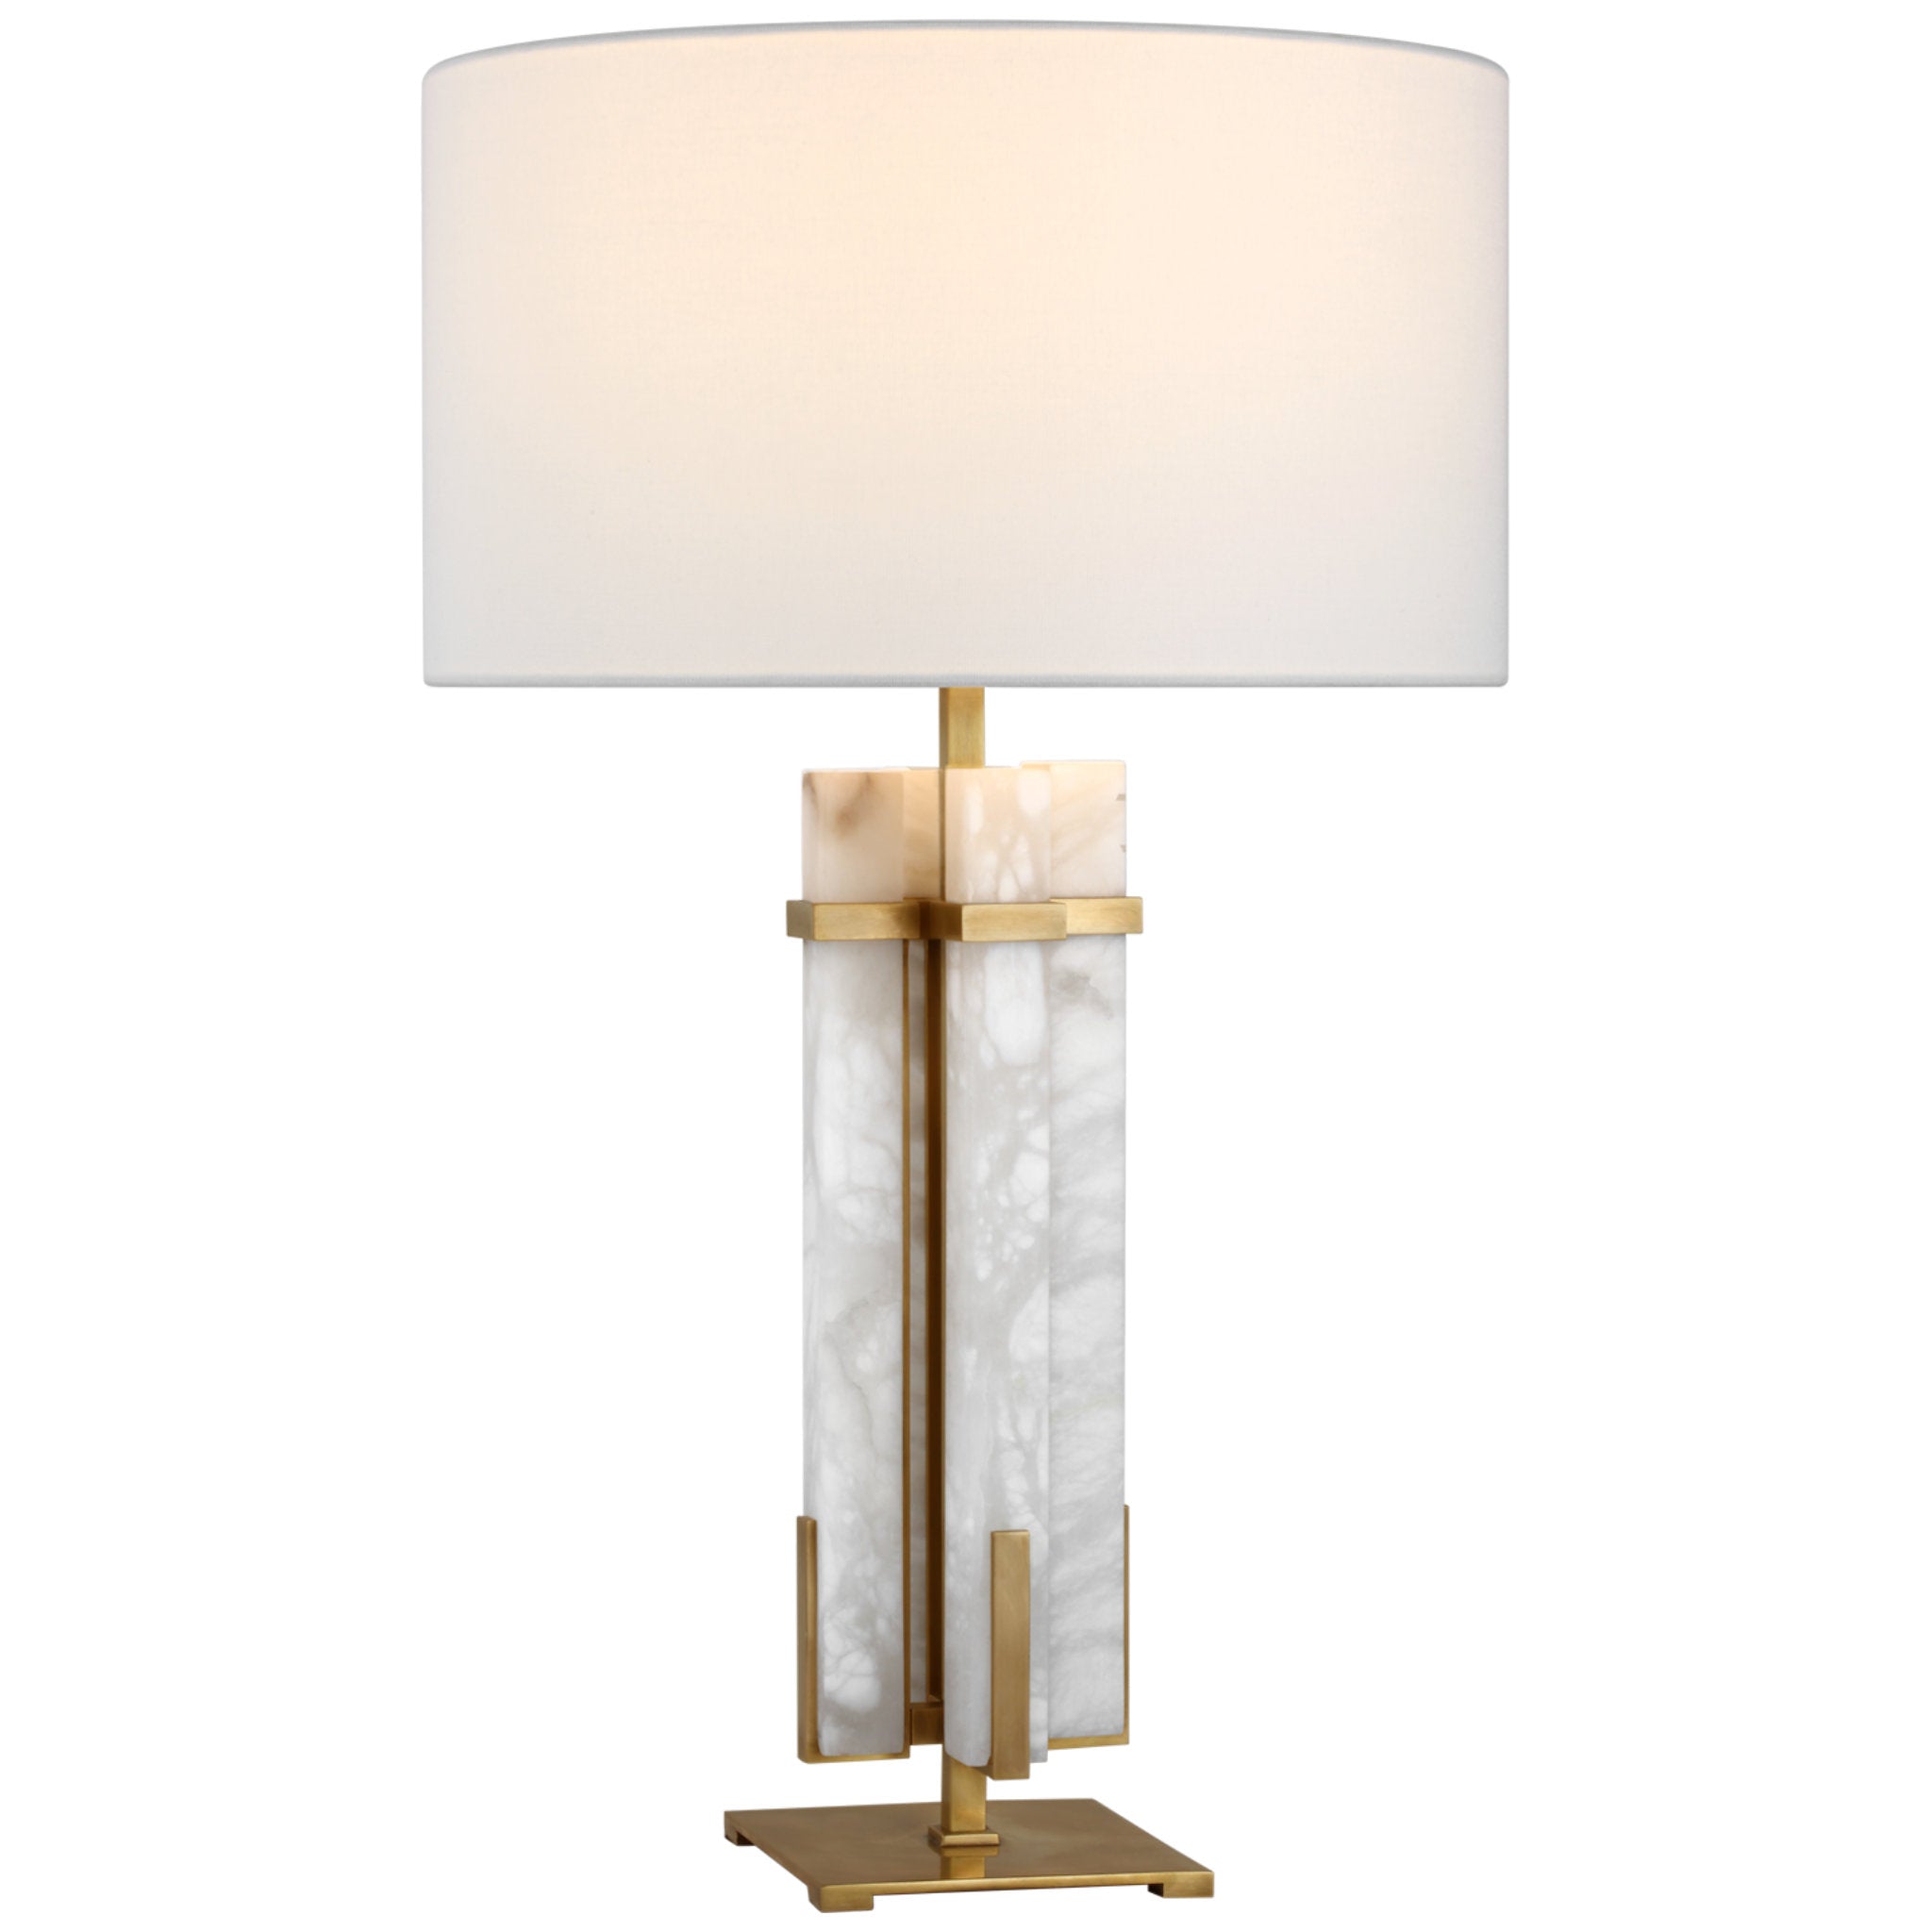 Ian K. Fowler Malik Large Table Lamp in Hand-Rubbed Antique Brass and Alabaster with Linen Shade